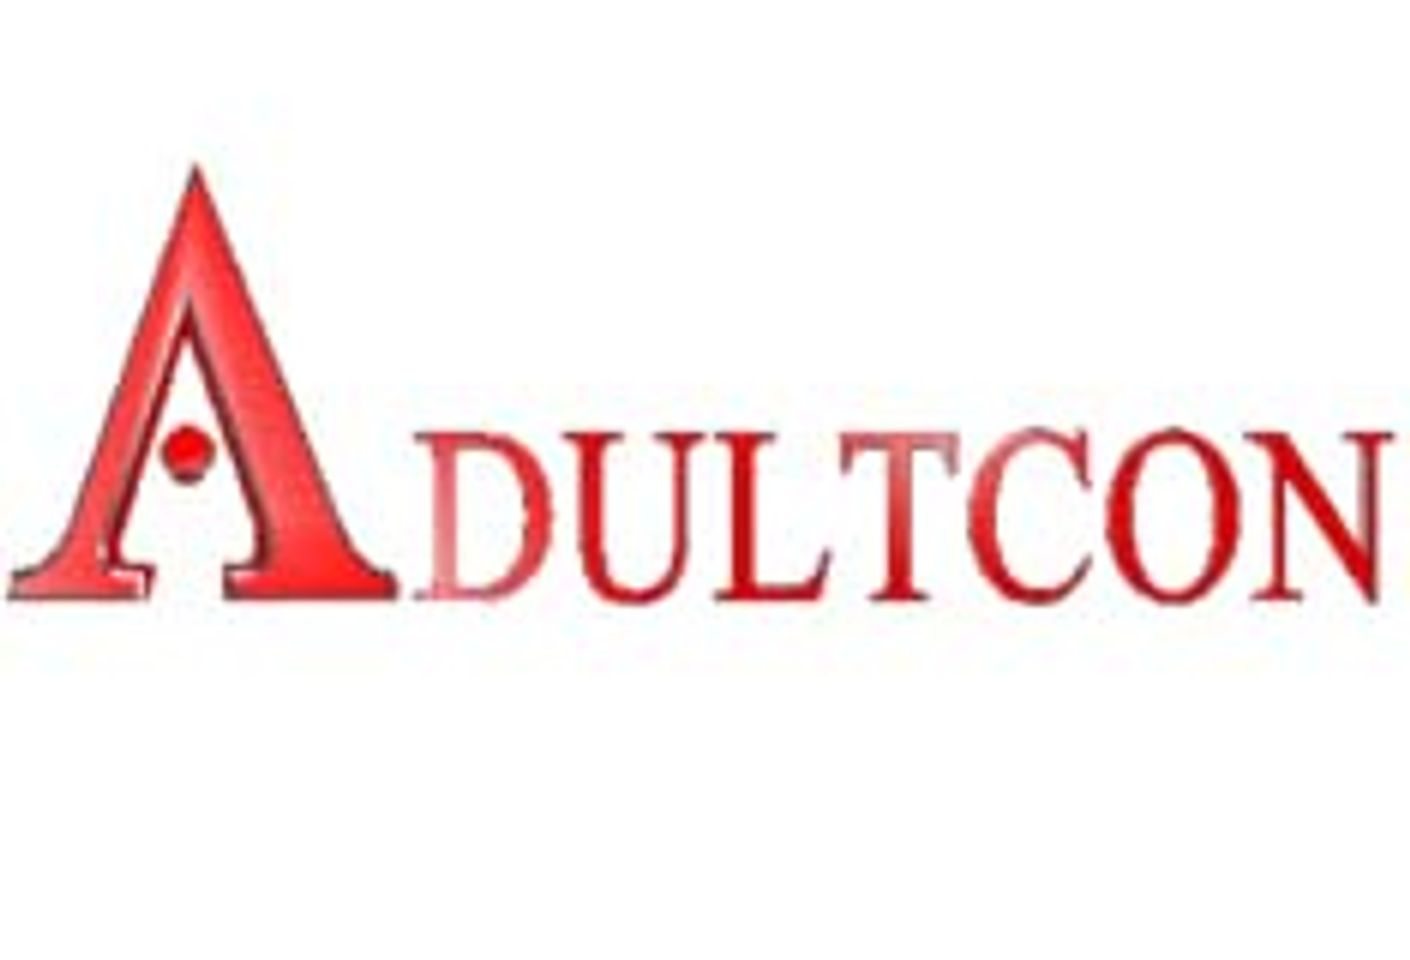 Adultcon 6 Coming Soon